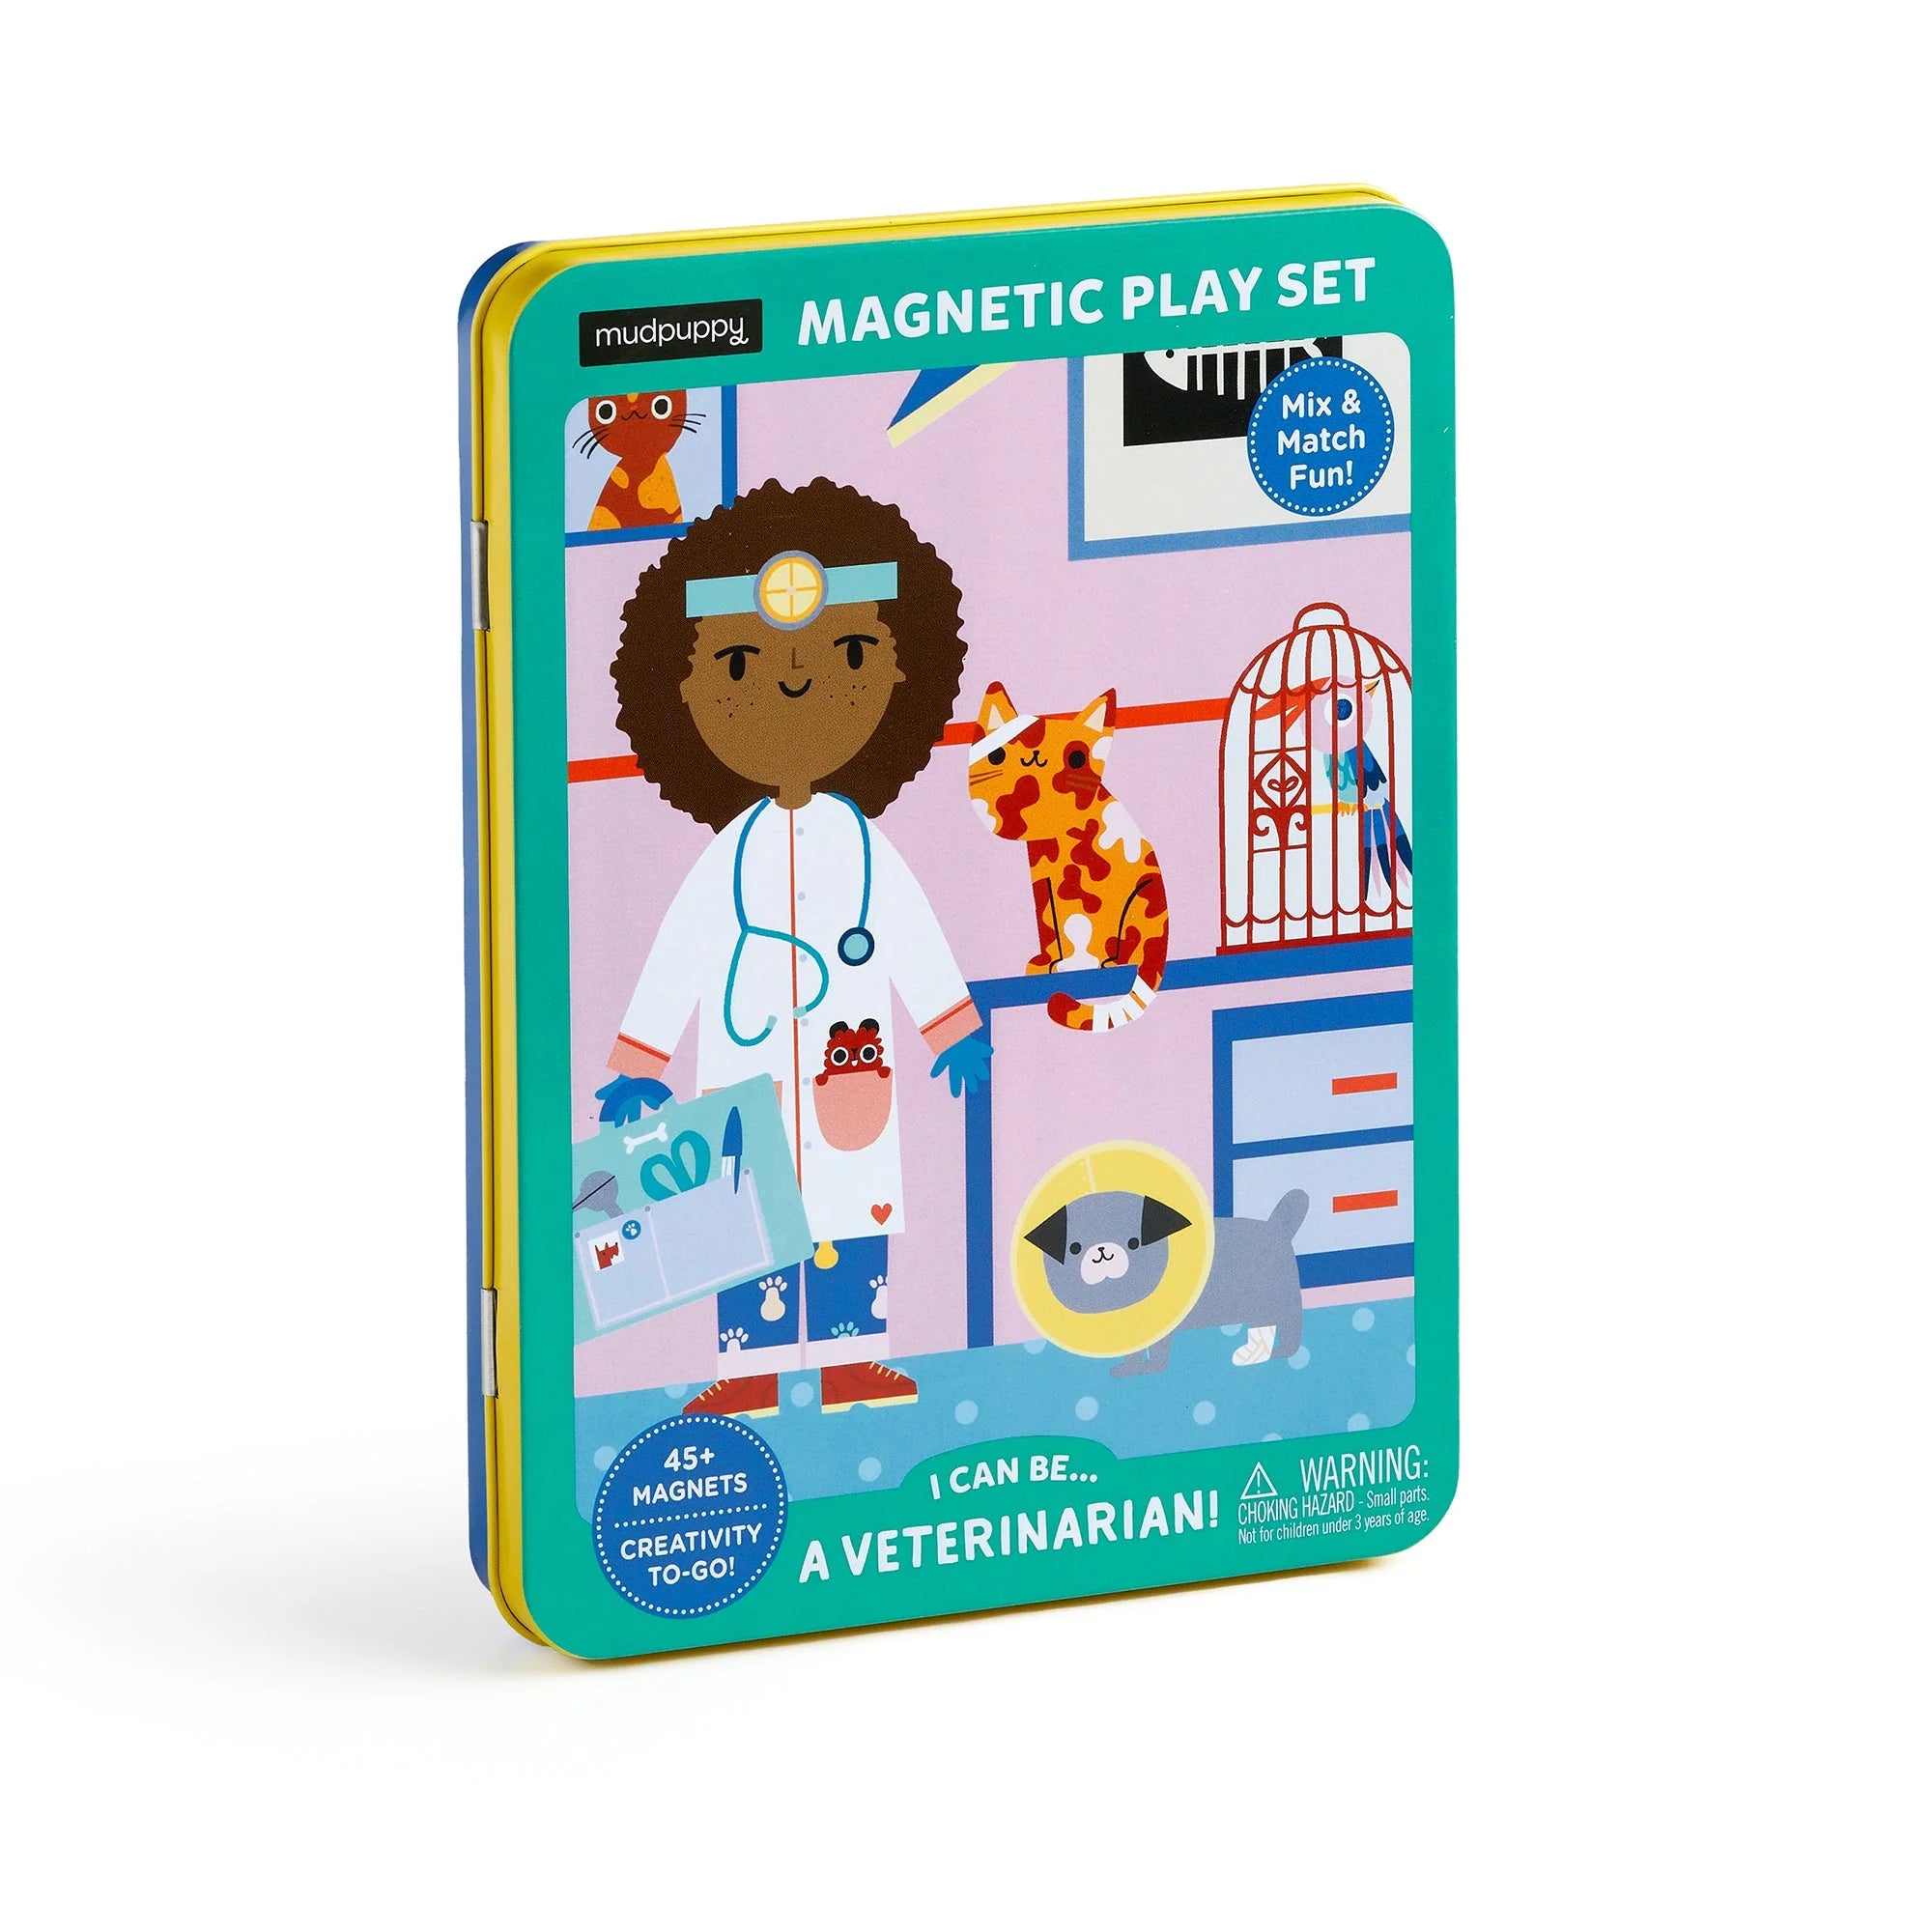 Mudpuppy Magnetic Play Set: I Can Be...A Veterinarian!